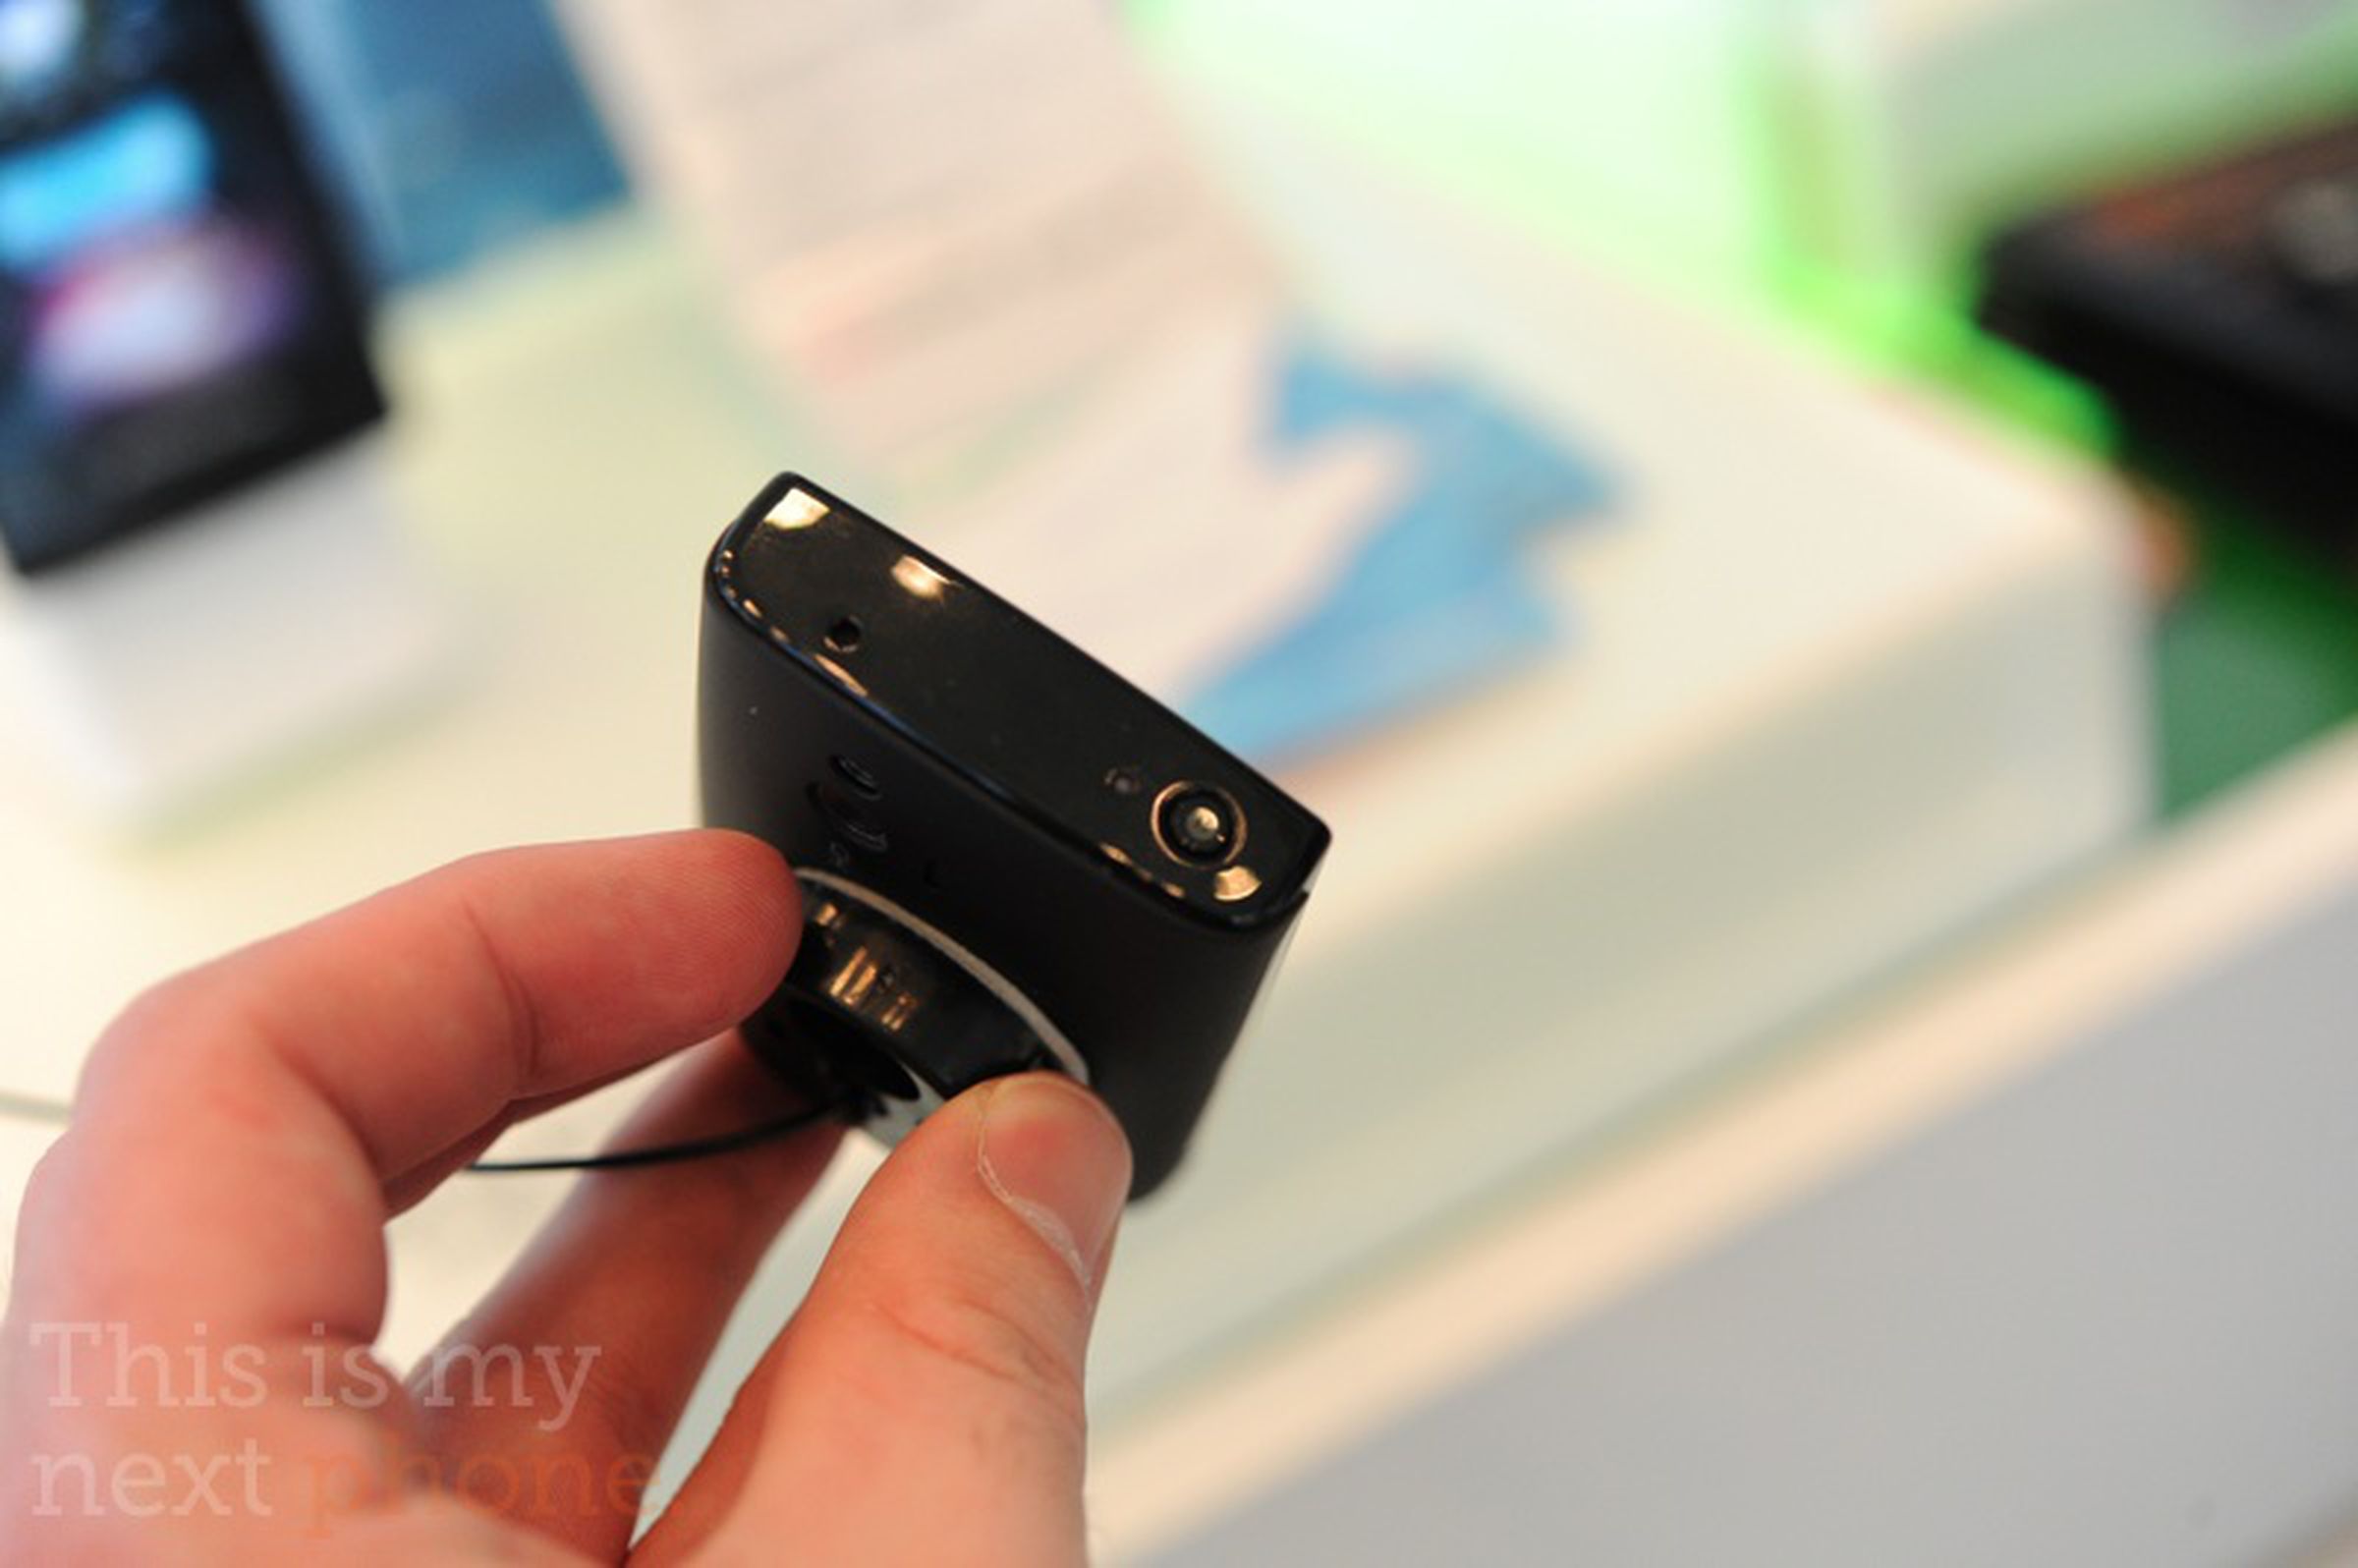 Xperia Mini and Mini Pro hands-on pictures